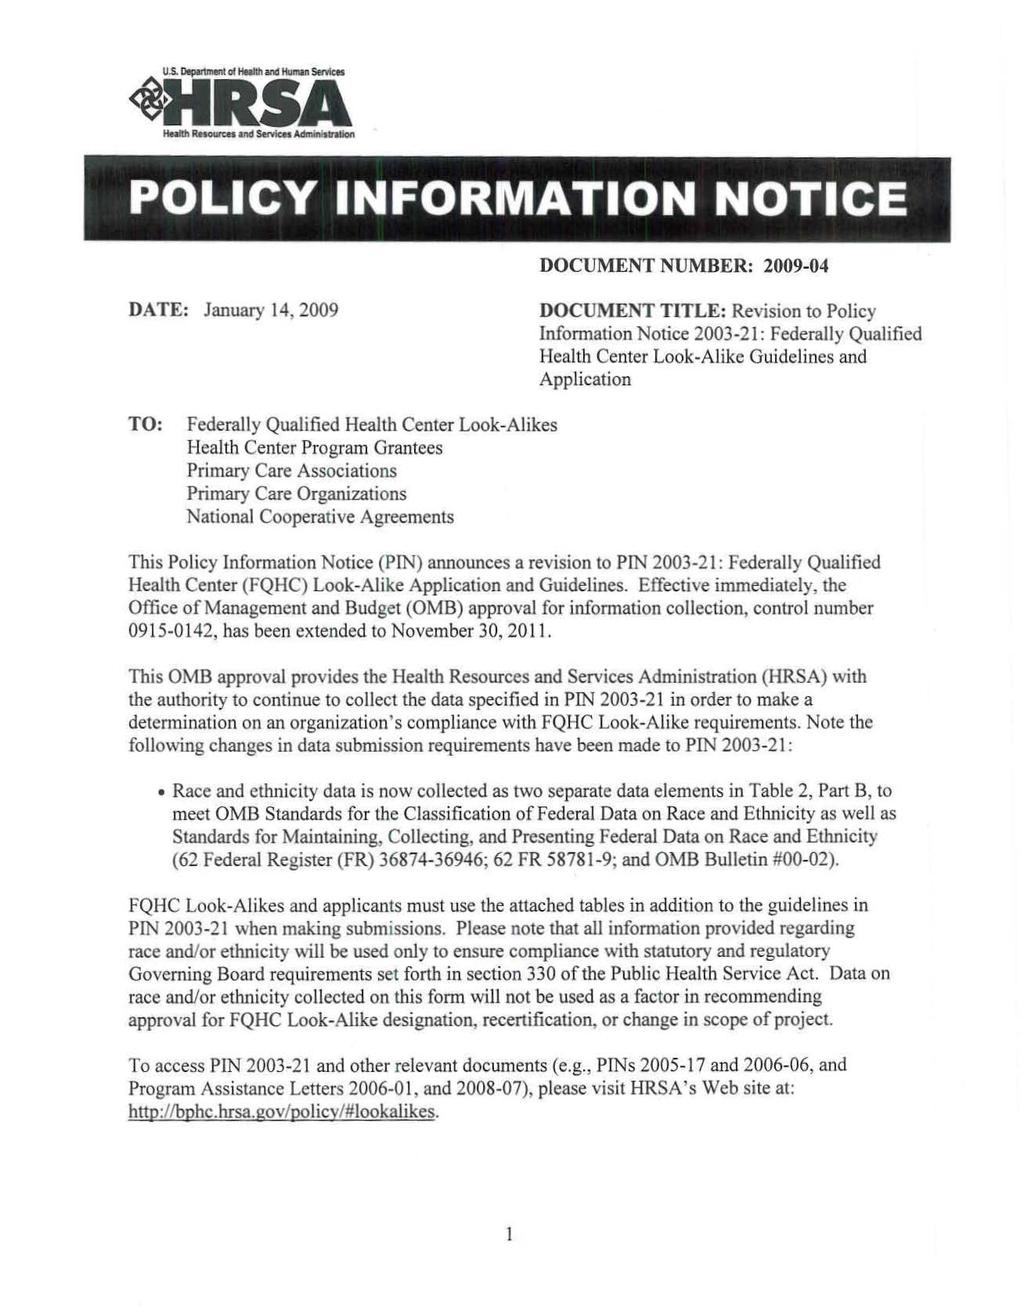 POLICY INFORMATION NOTICE DOCUMENT NUMBER: 2009-04 DAT E: January 14,2009 DO CUM ENT T ITLE : Revision to Policy Information Notice 2003-21 : Federally Qualified Health Center Look-Alike Guidelines